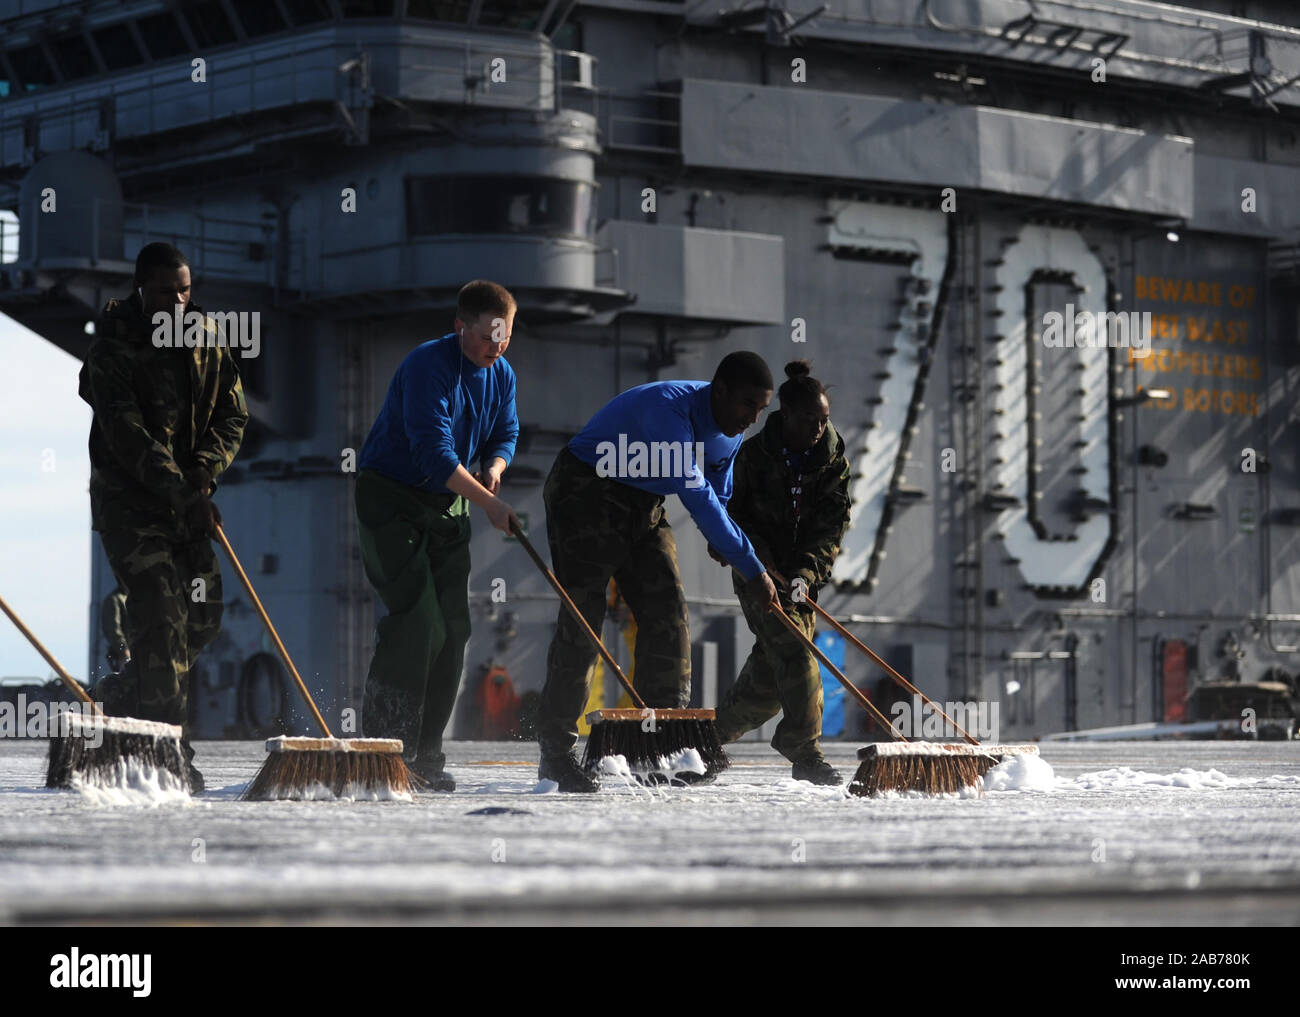 PACIFIC OCEAN (Feb. 3, 2013) Sailors participate in a fight deck scrubbing exercise aboard the aircraft carrier USS Carl Vinson (CVN 70). Carl Vinson is underway conducting sea trials as the final stage of a six-month planned incremental availability. Stock Photo